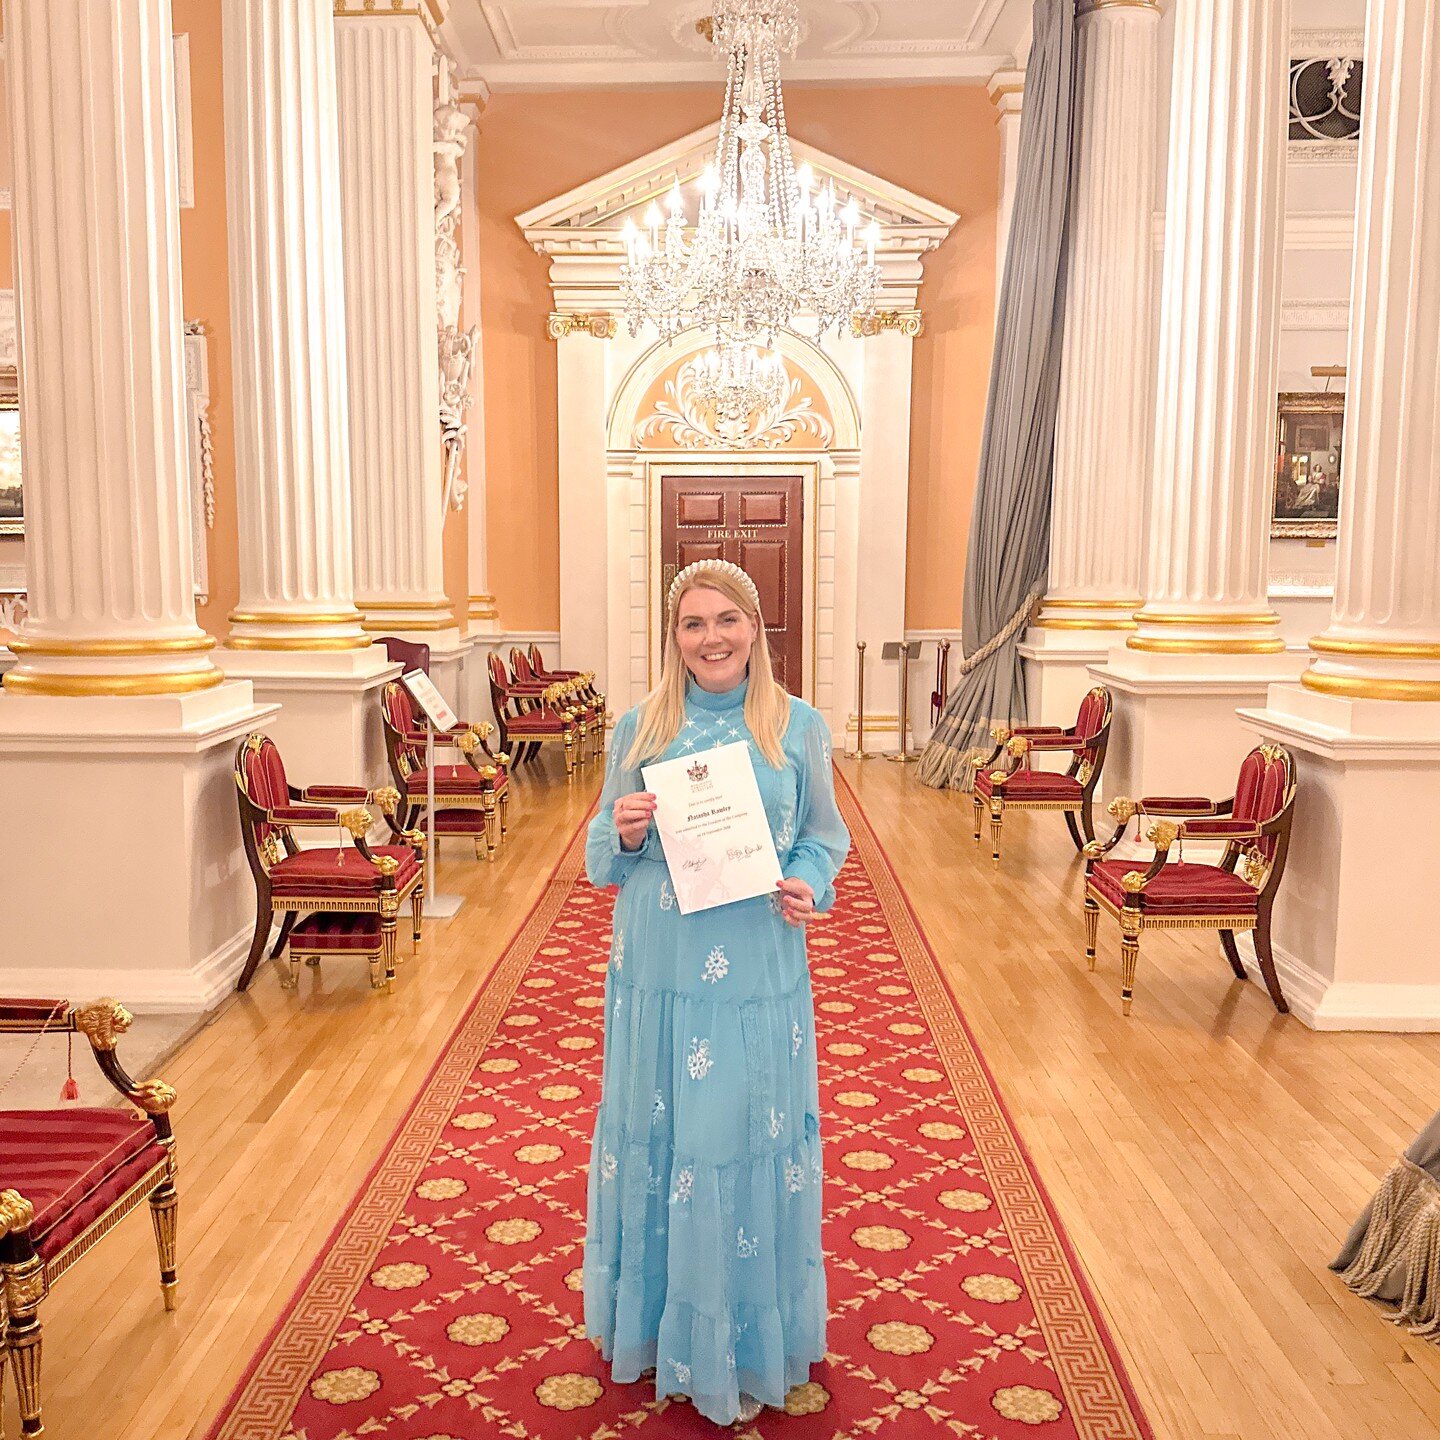 So something very exciting happened on Thursday evening!

I had my Freedom of the Company ceremony for the The Worshipful Company of Marketors.

It was a incredible ceremony at Mansion House, London. Followed by a spectacular three course meal with g